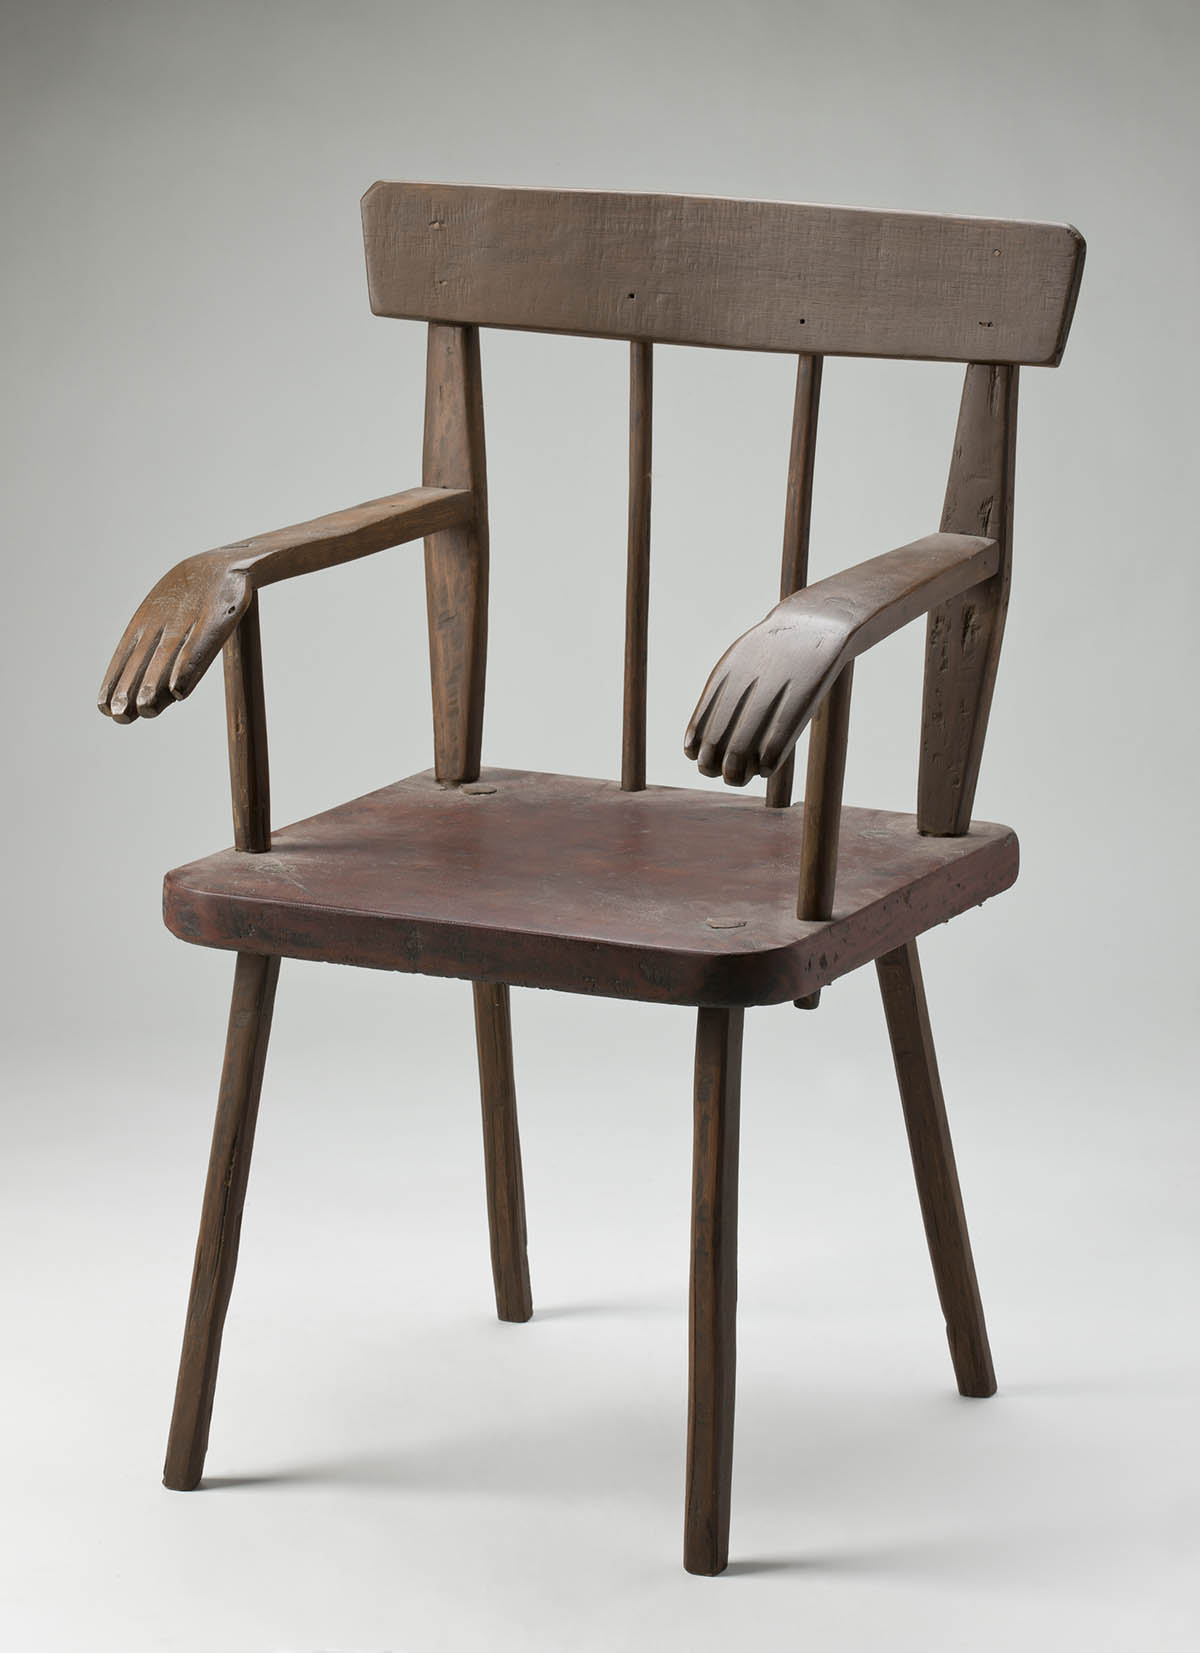 A wooden chair with decorative carved hands at the end of each arm. - click to view larger image